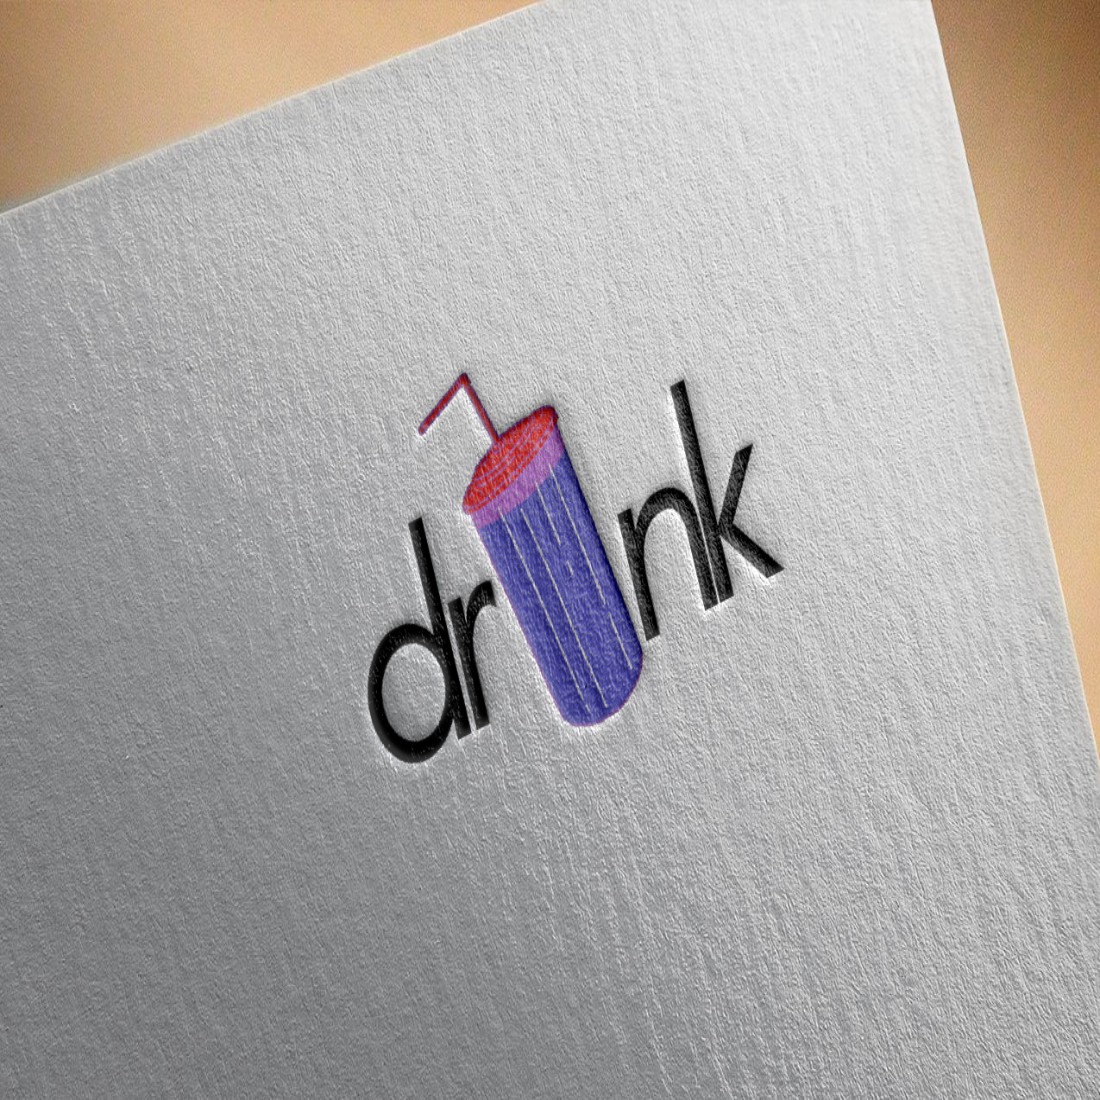 Drink Logo Design mockup example preview.